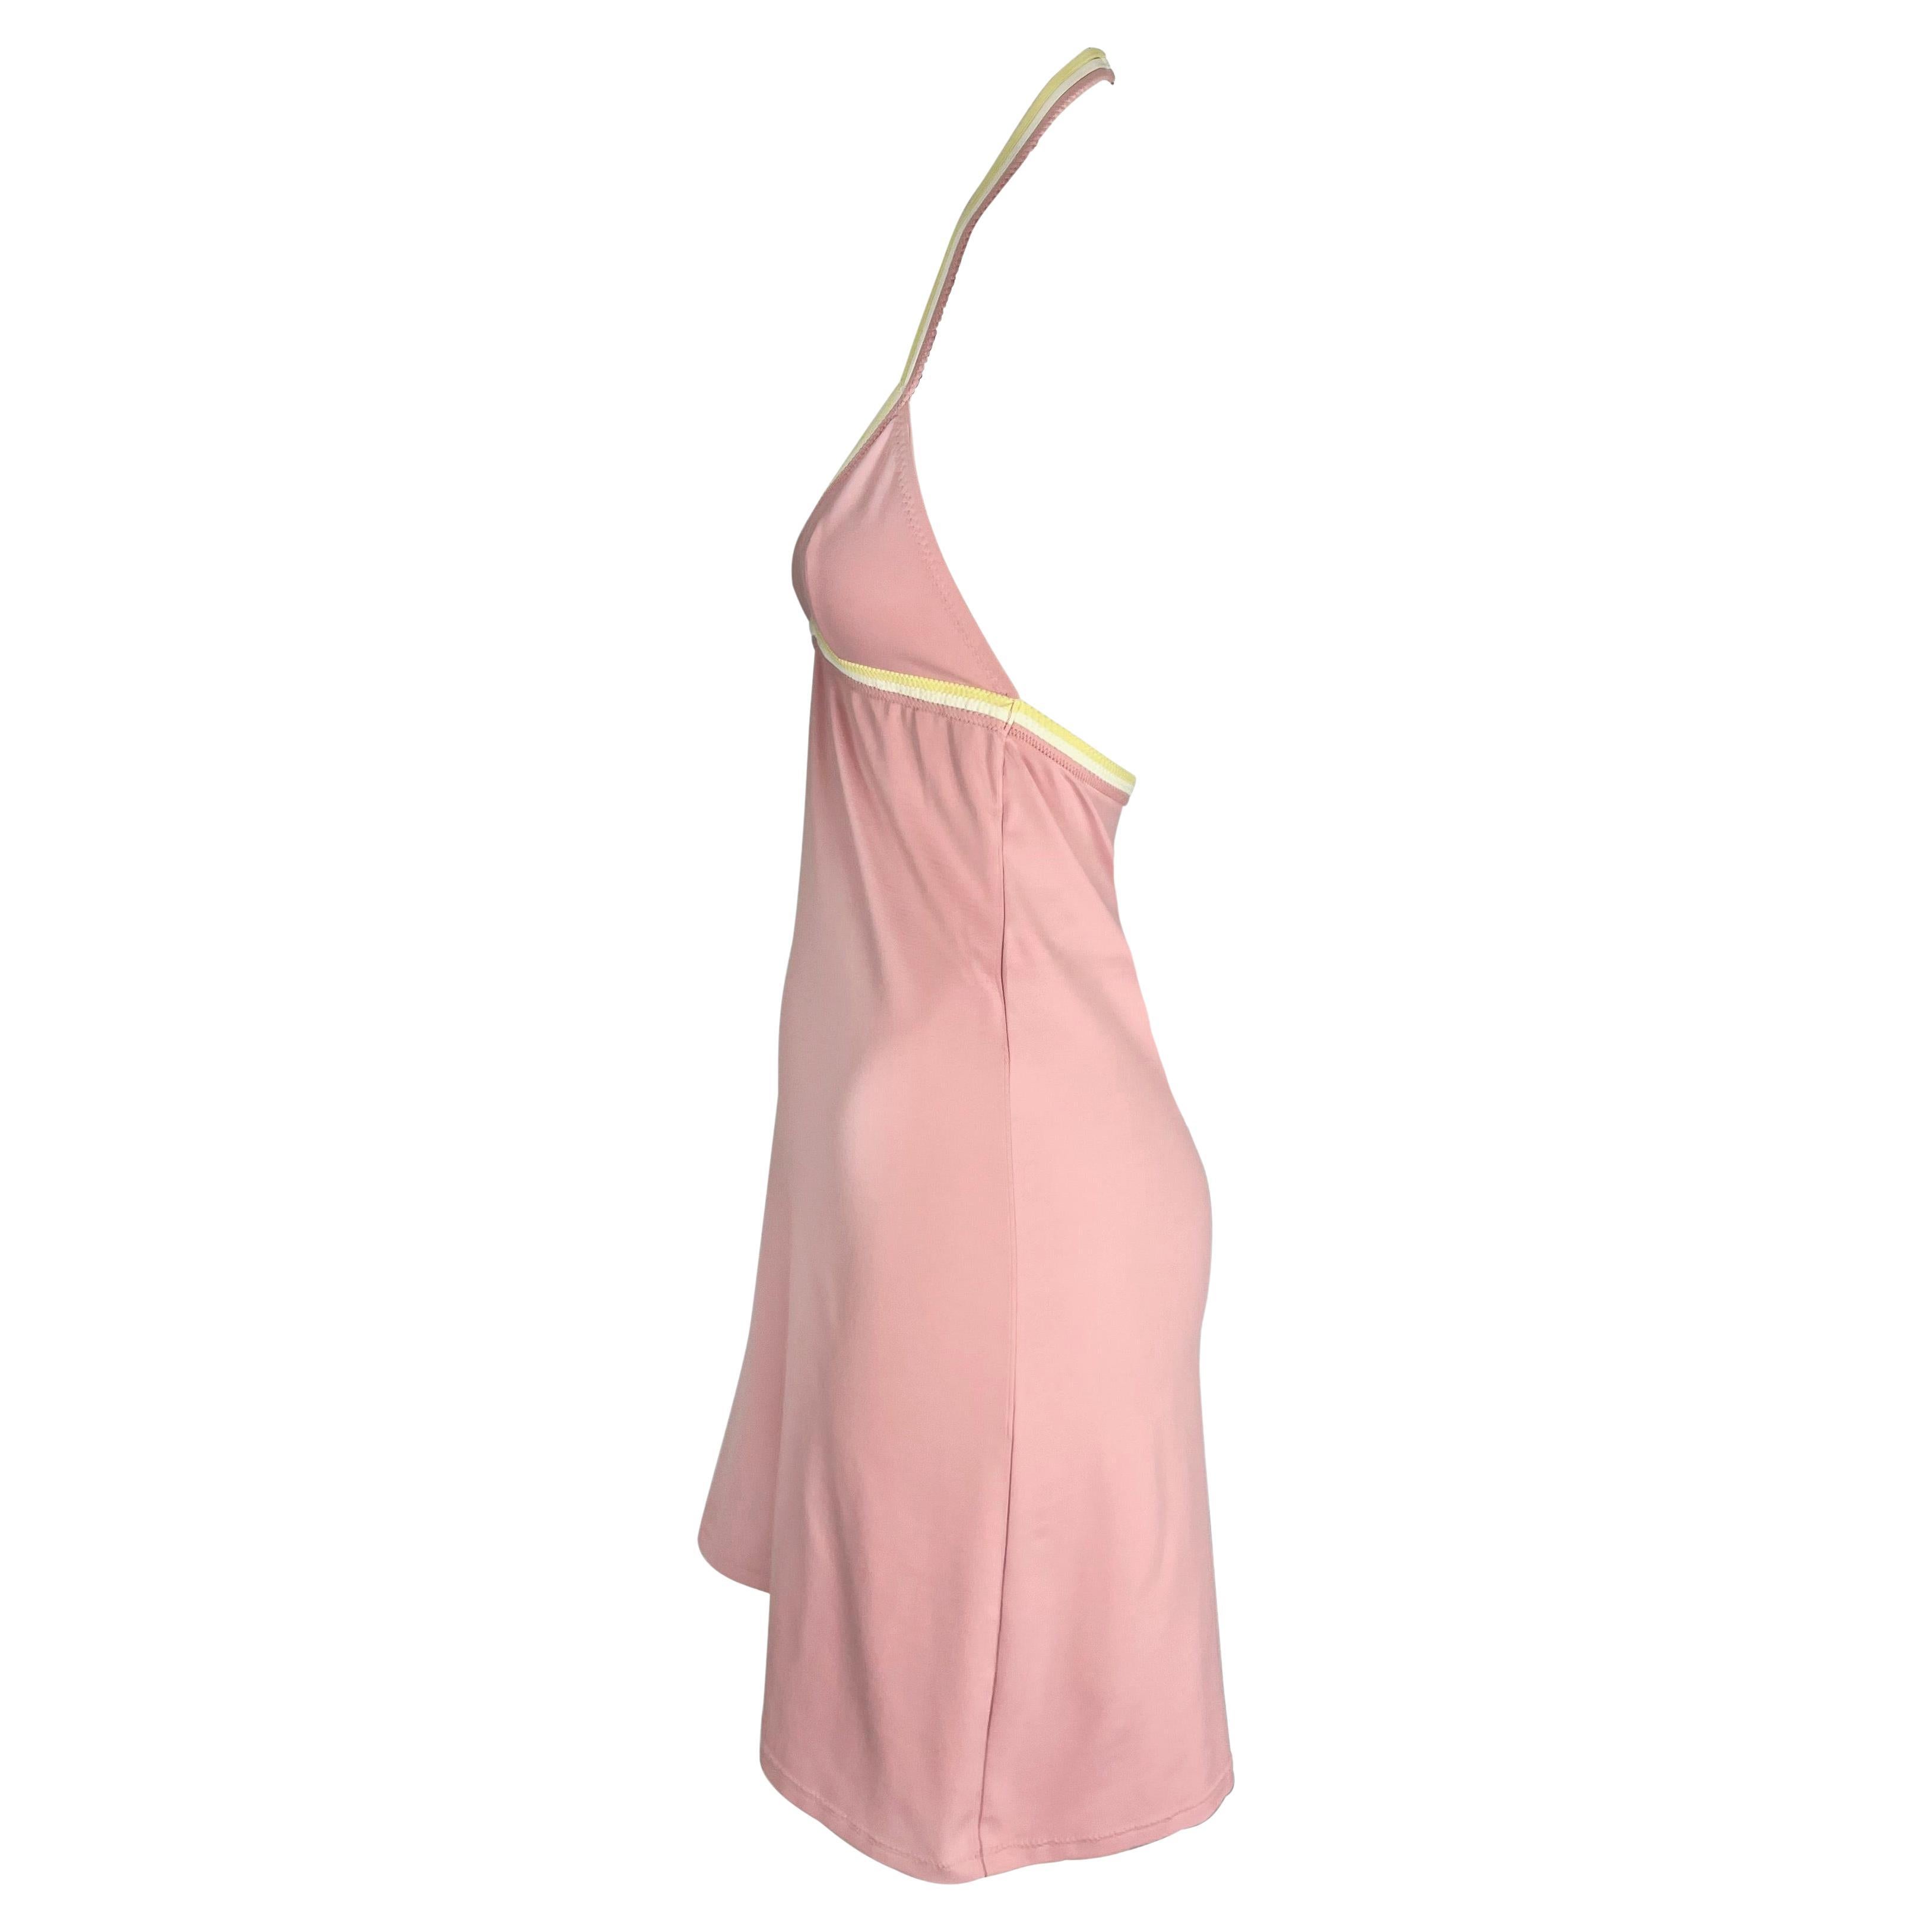 Presenting a fabulous light pink Chanel halter neck mini dress, designed by Karl Lagerfeld. From the 2004 Cruise collection, this flared dress is constructed of an elastic material that allows this dress to perfectly hug the body. The dress features